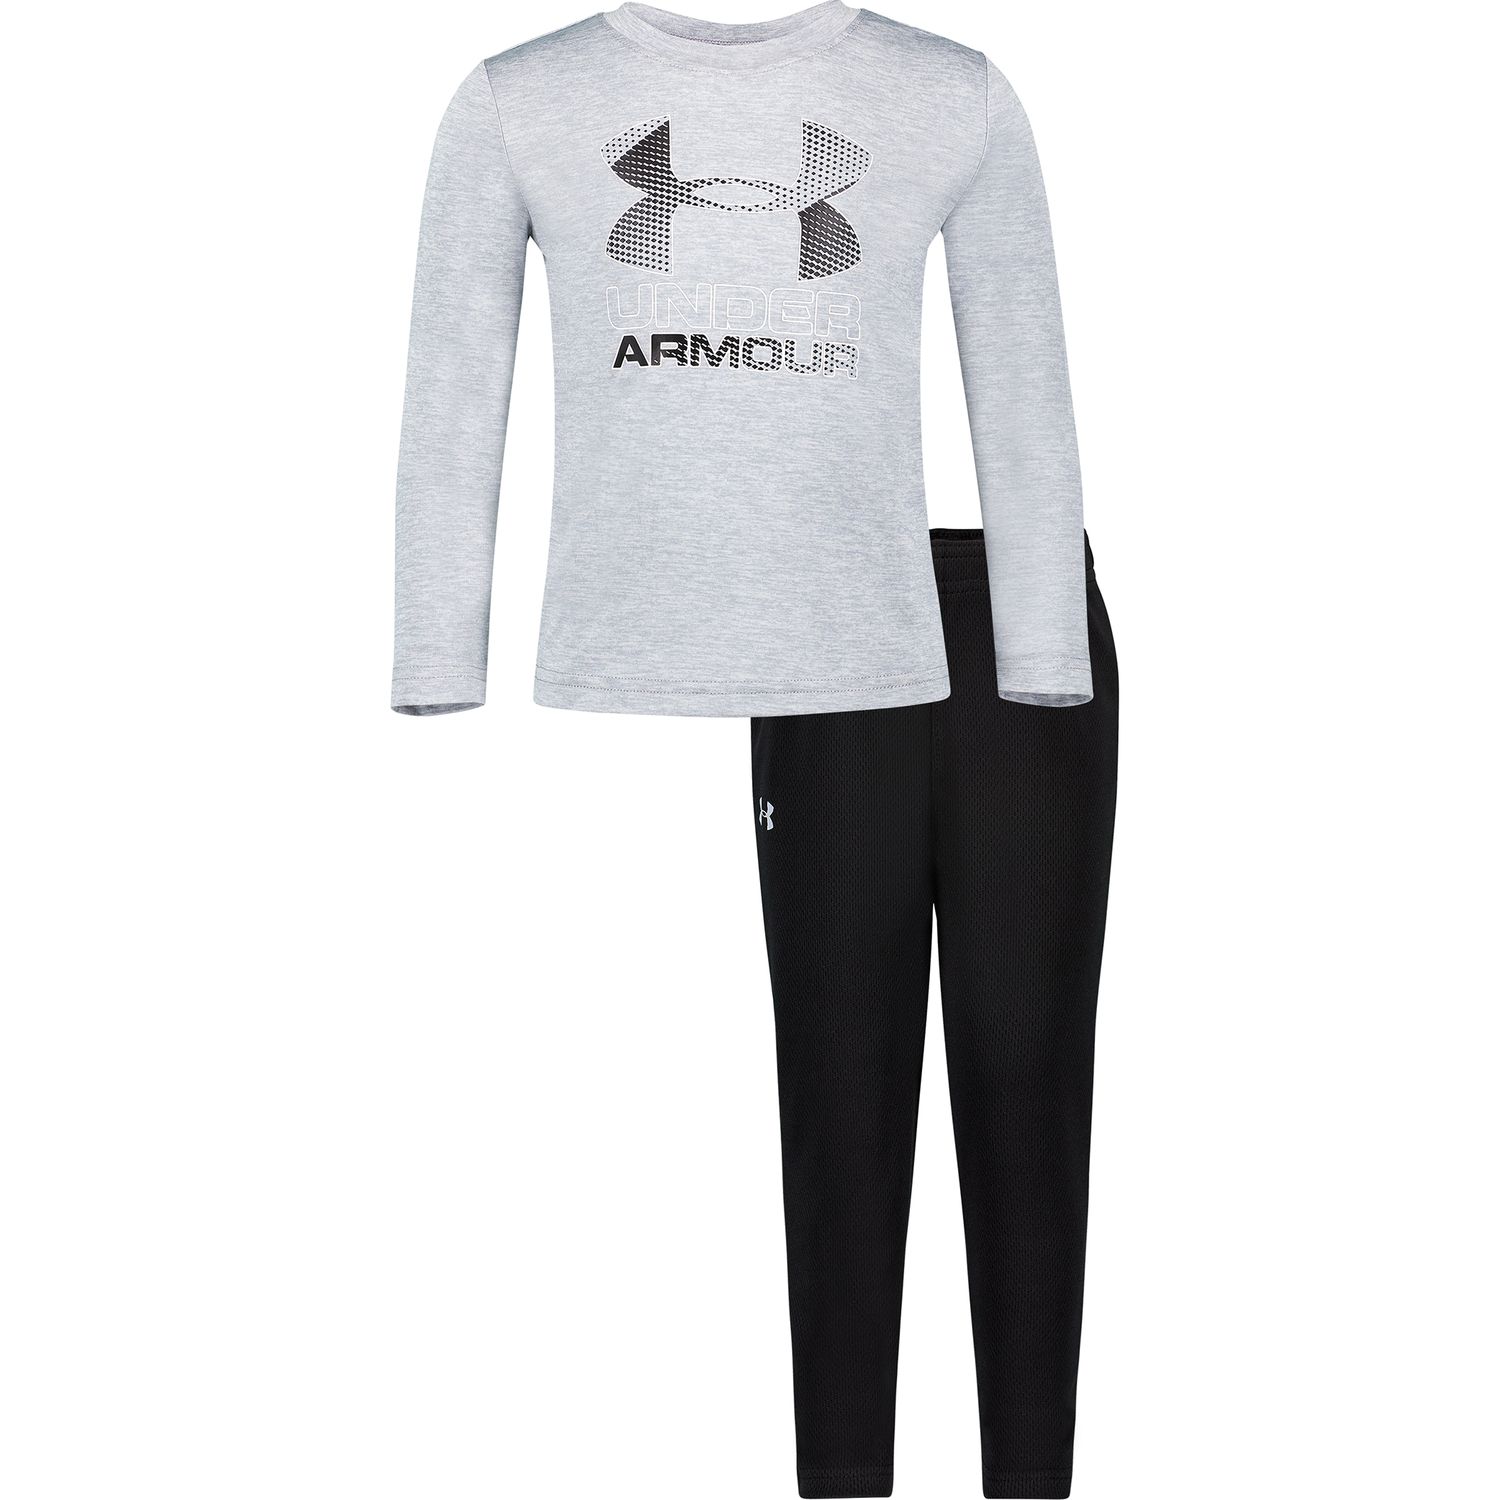 Boys Under Armour Kids Toddlers 